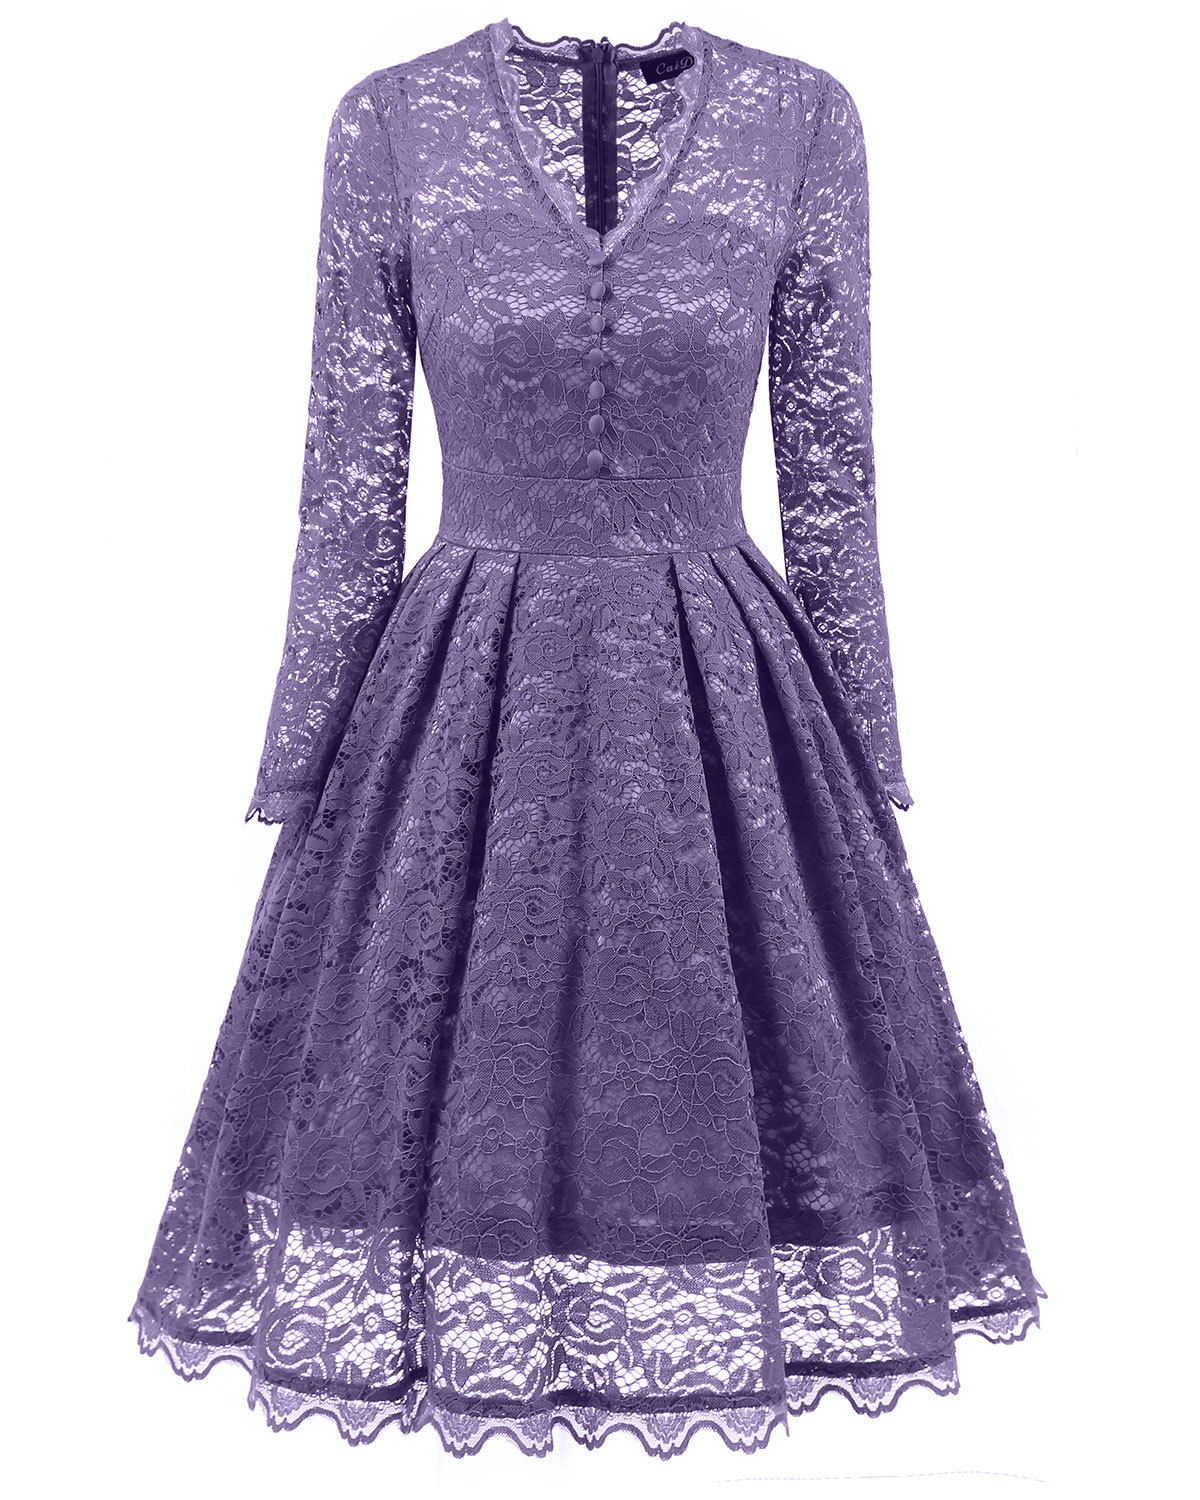 Purple V-neck Floral Lace A-line Short Dress With Long Sleeves , Homecoming Dress, Cocktail Dresses, Graduation Dresses